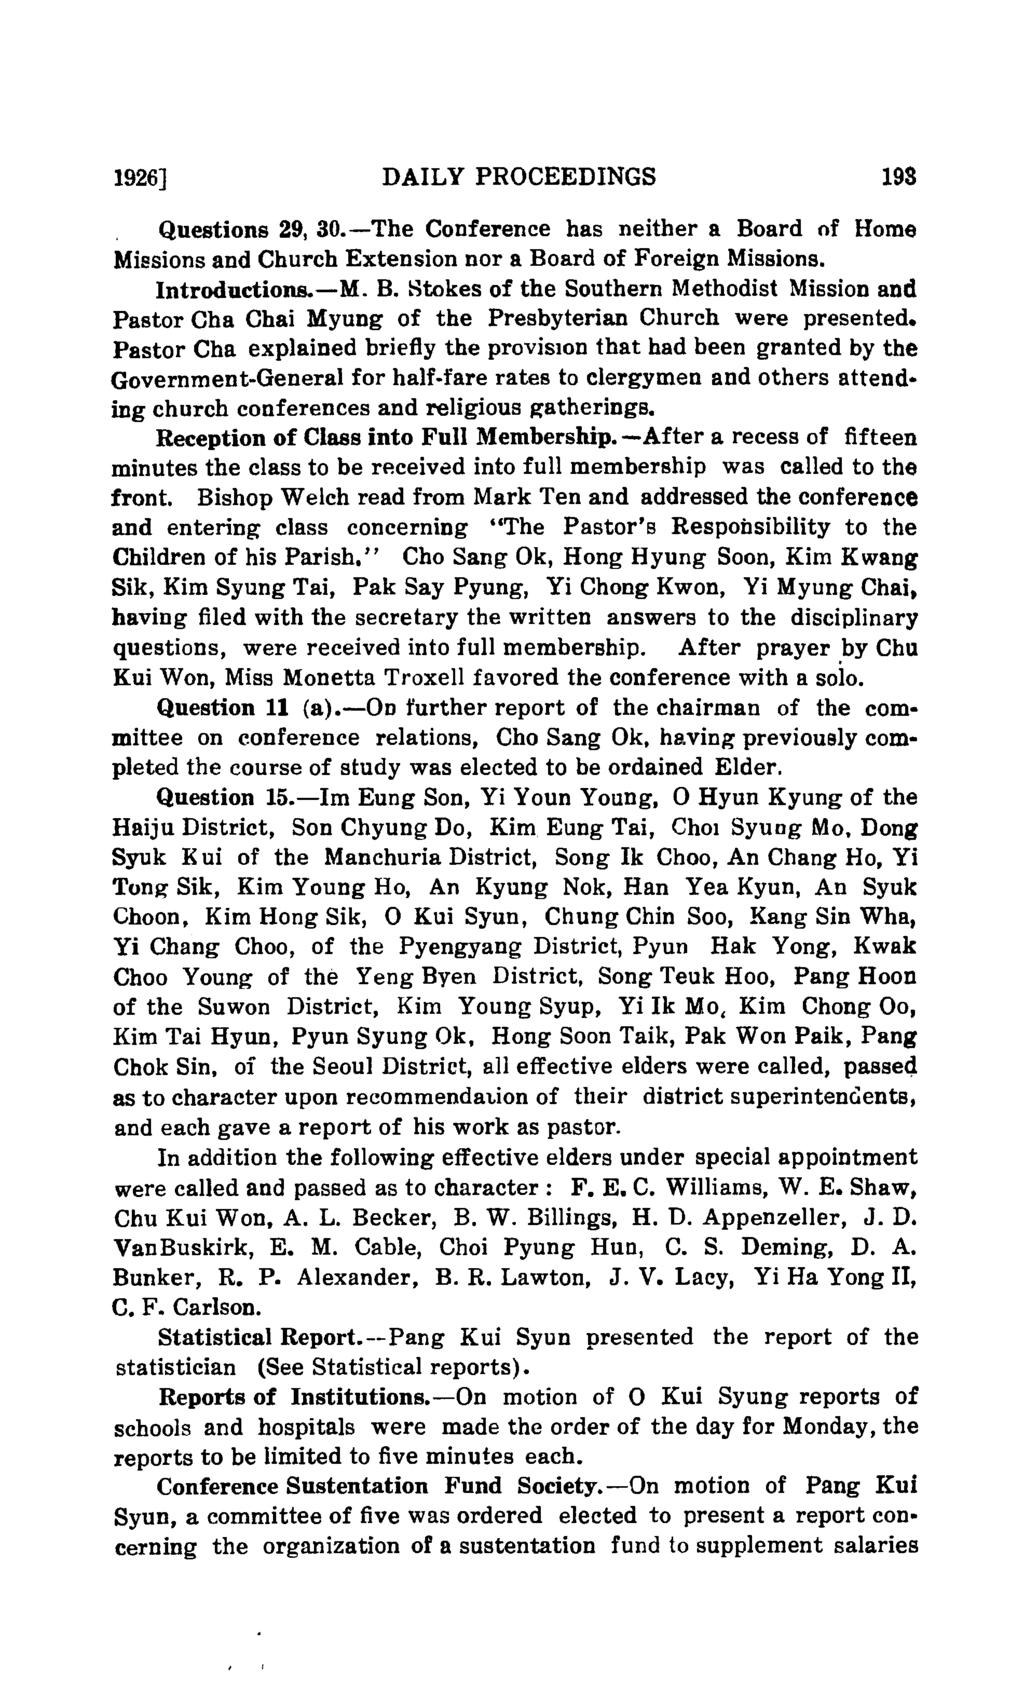 1926] DAILY PROCEEDINGS 19S Questions 29, 30.-The Conference has neither a Board of Home Missions and Church Extension nor a Board of Foreign Missions. Introdudions.-M. B. Htokes of the Southern Methodist Mission and Pastor Cha Chai Myung of the Presbyterian Church were presented.